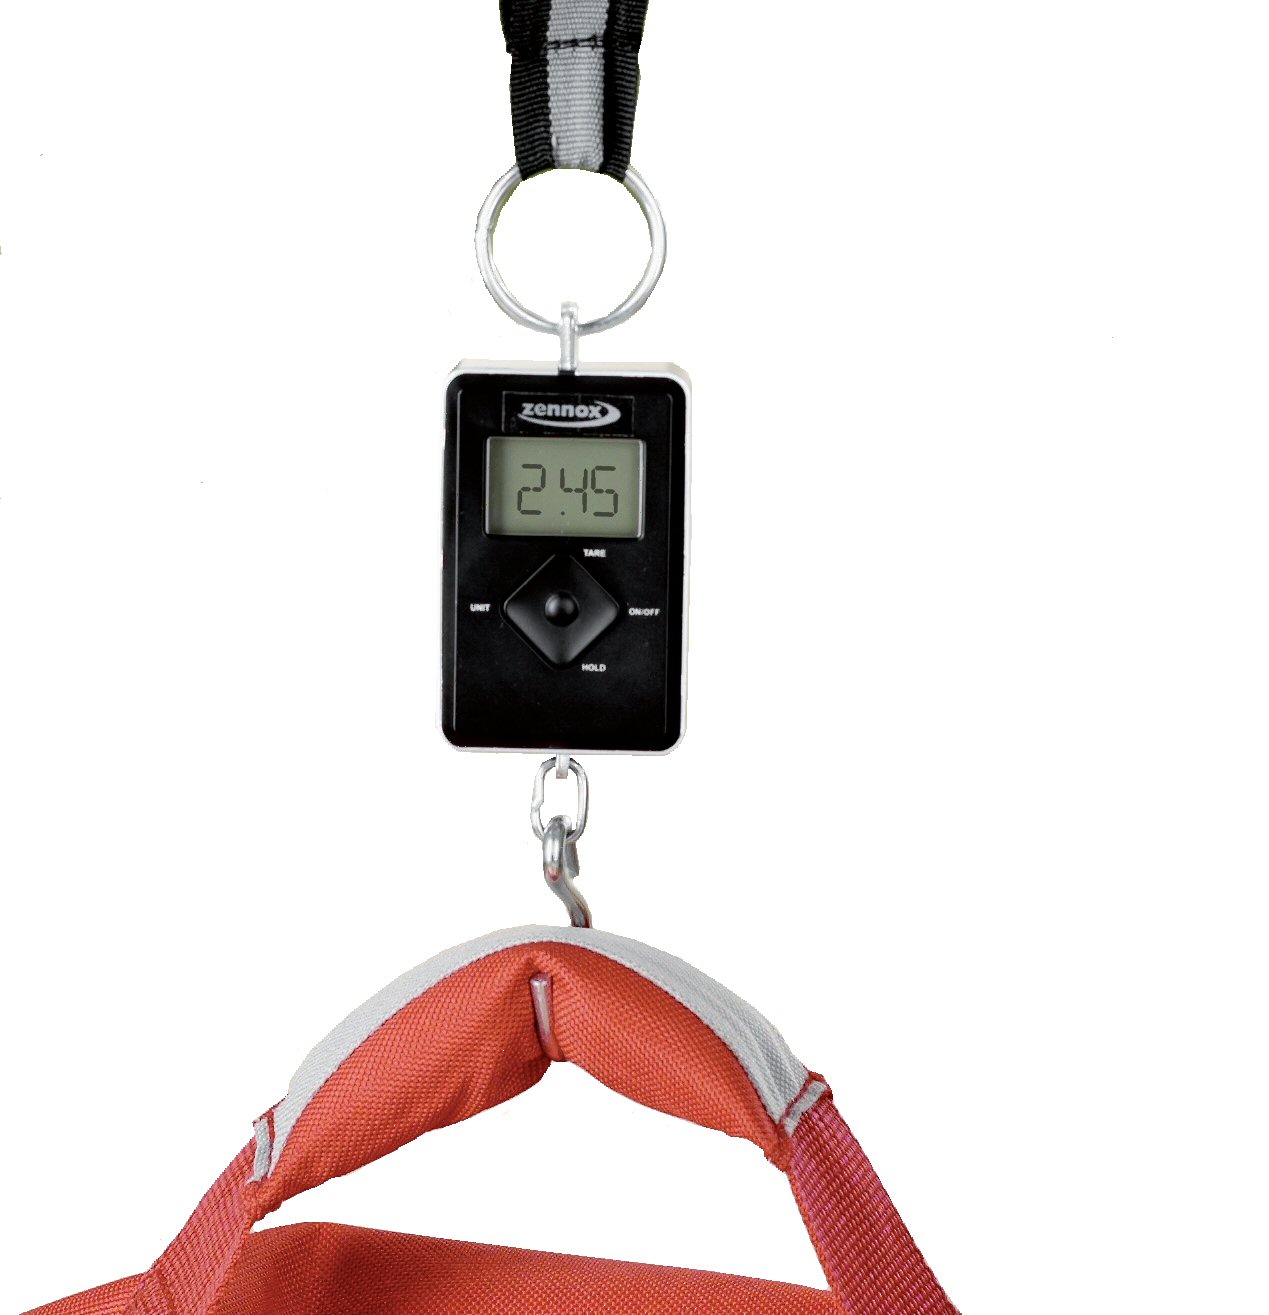 Unbranded Compact Digital Luggage Scales